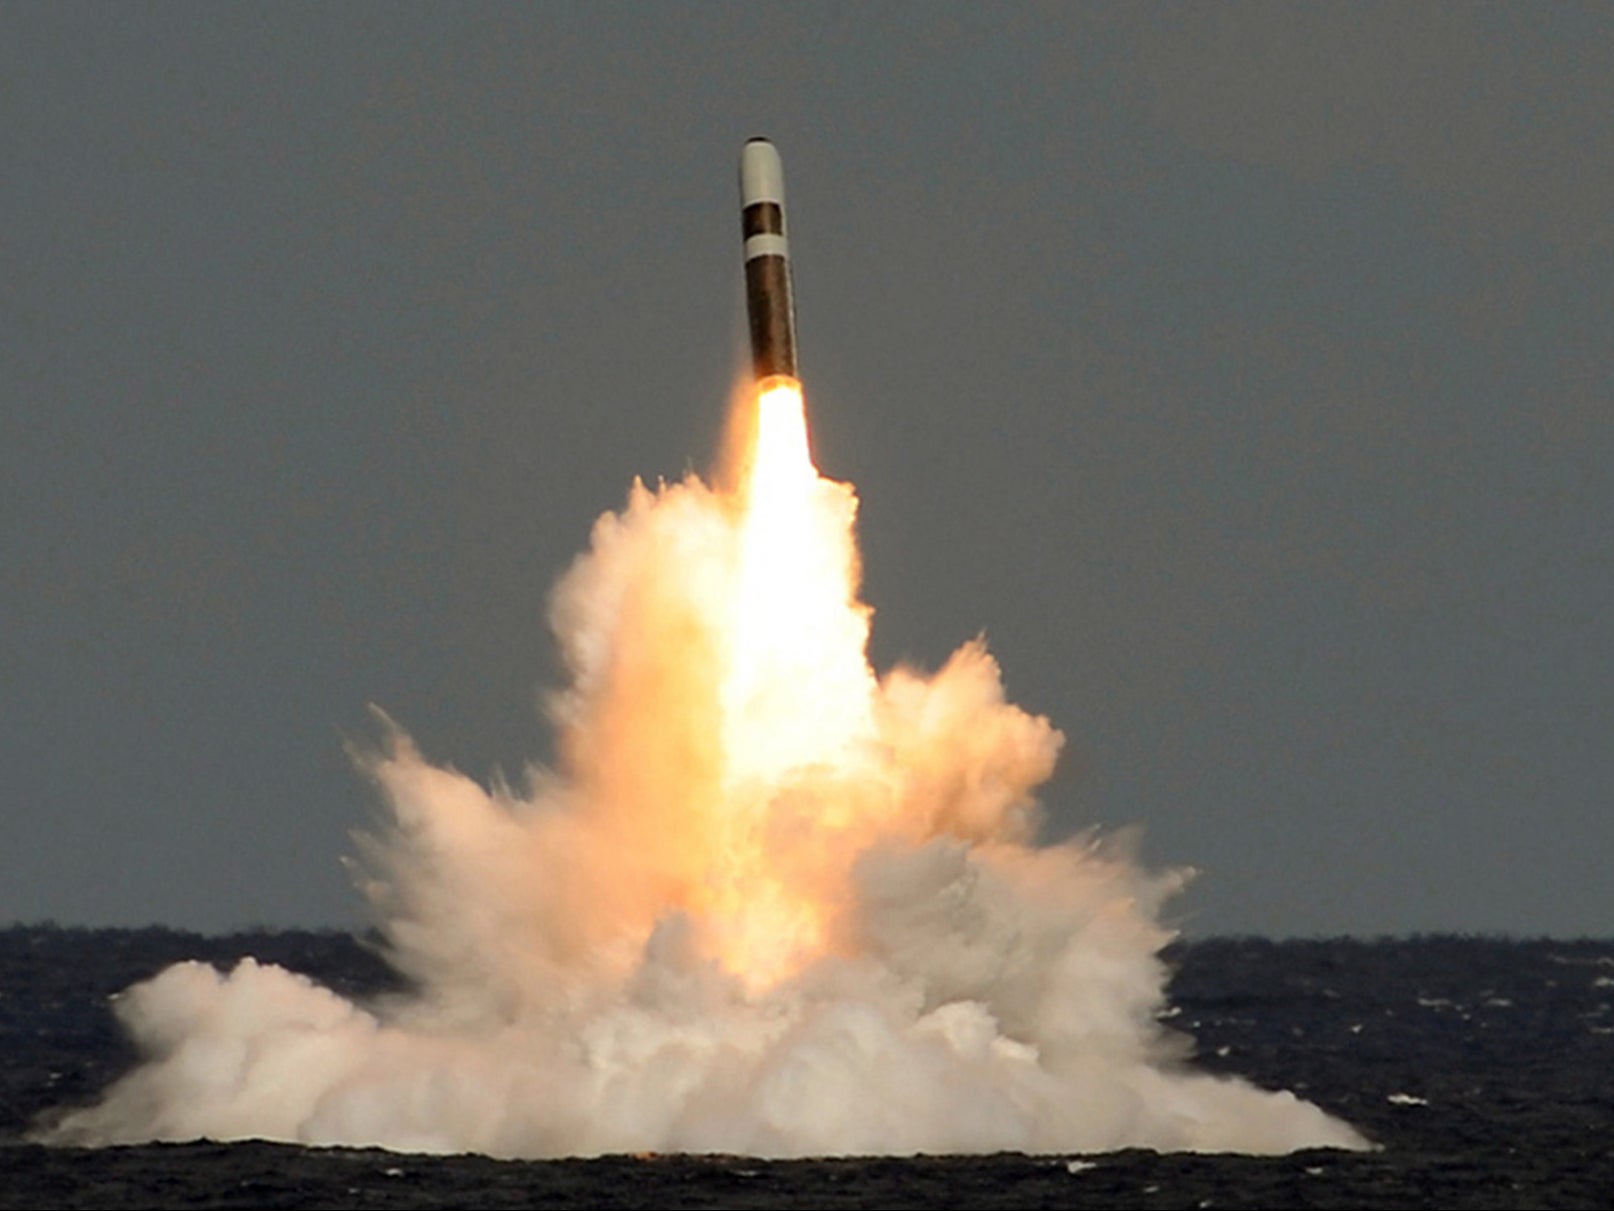 Shapps said the government retained ‘absolute confidence’ in the UK’s nuclear deterrent